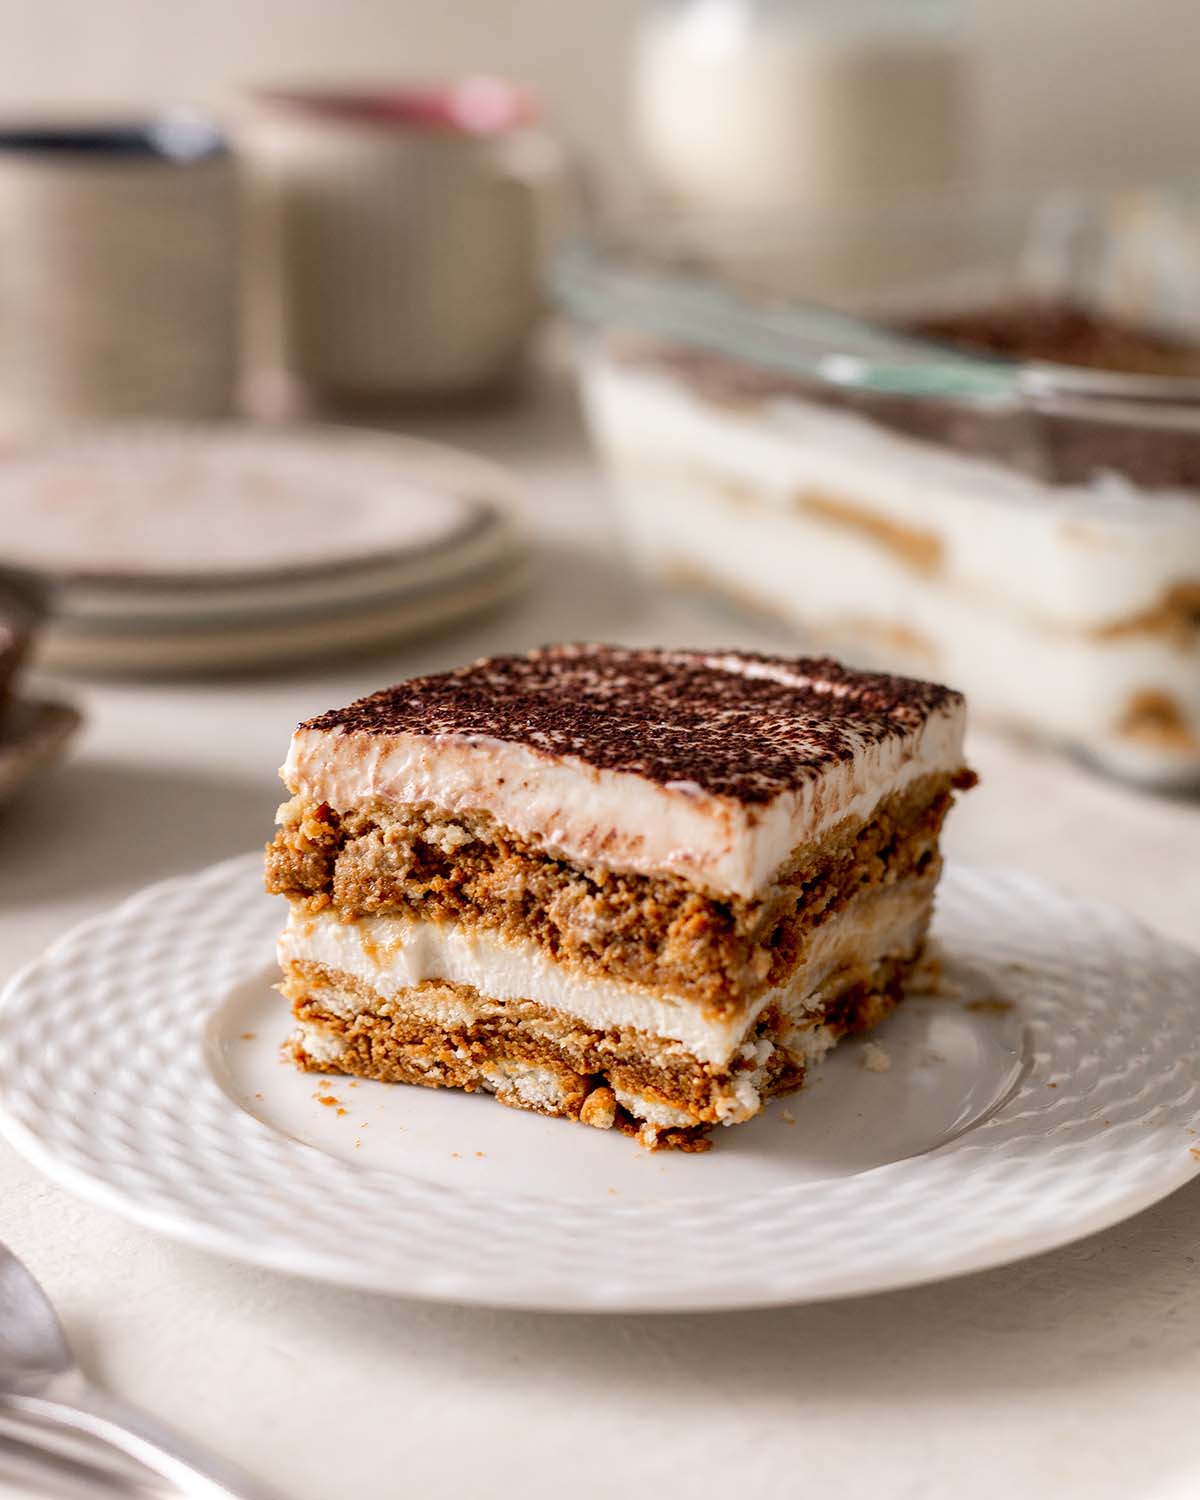 A piece of tiramisu on a plate shown from the side